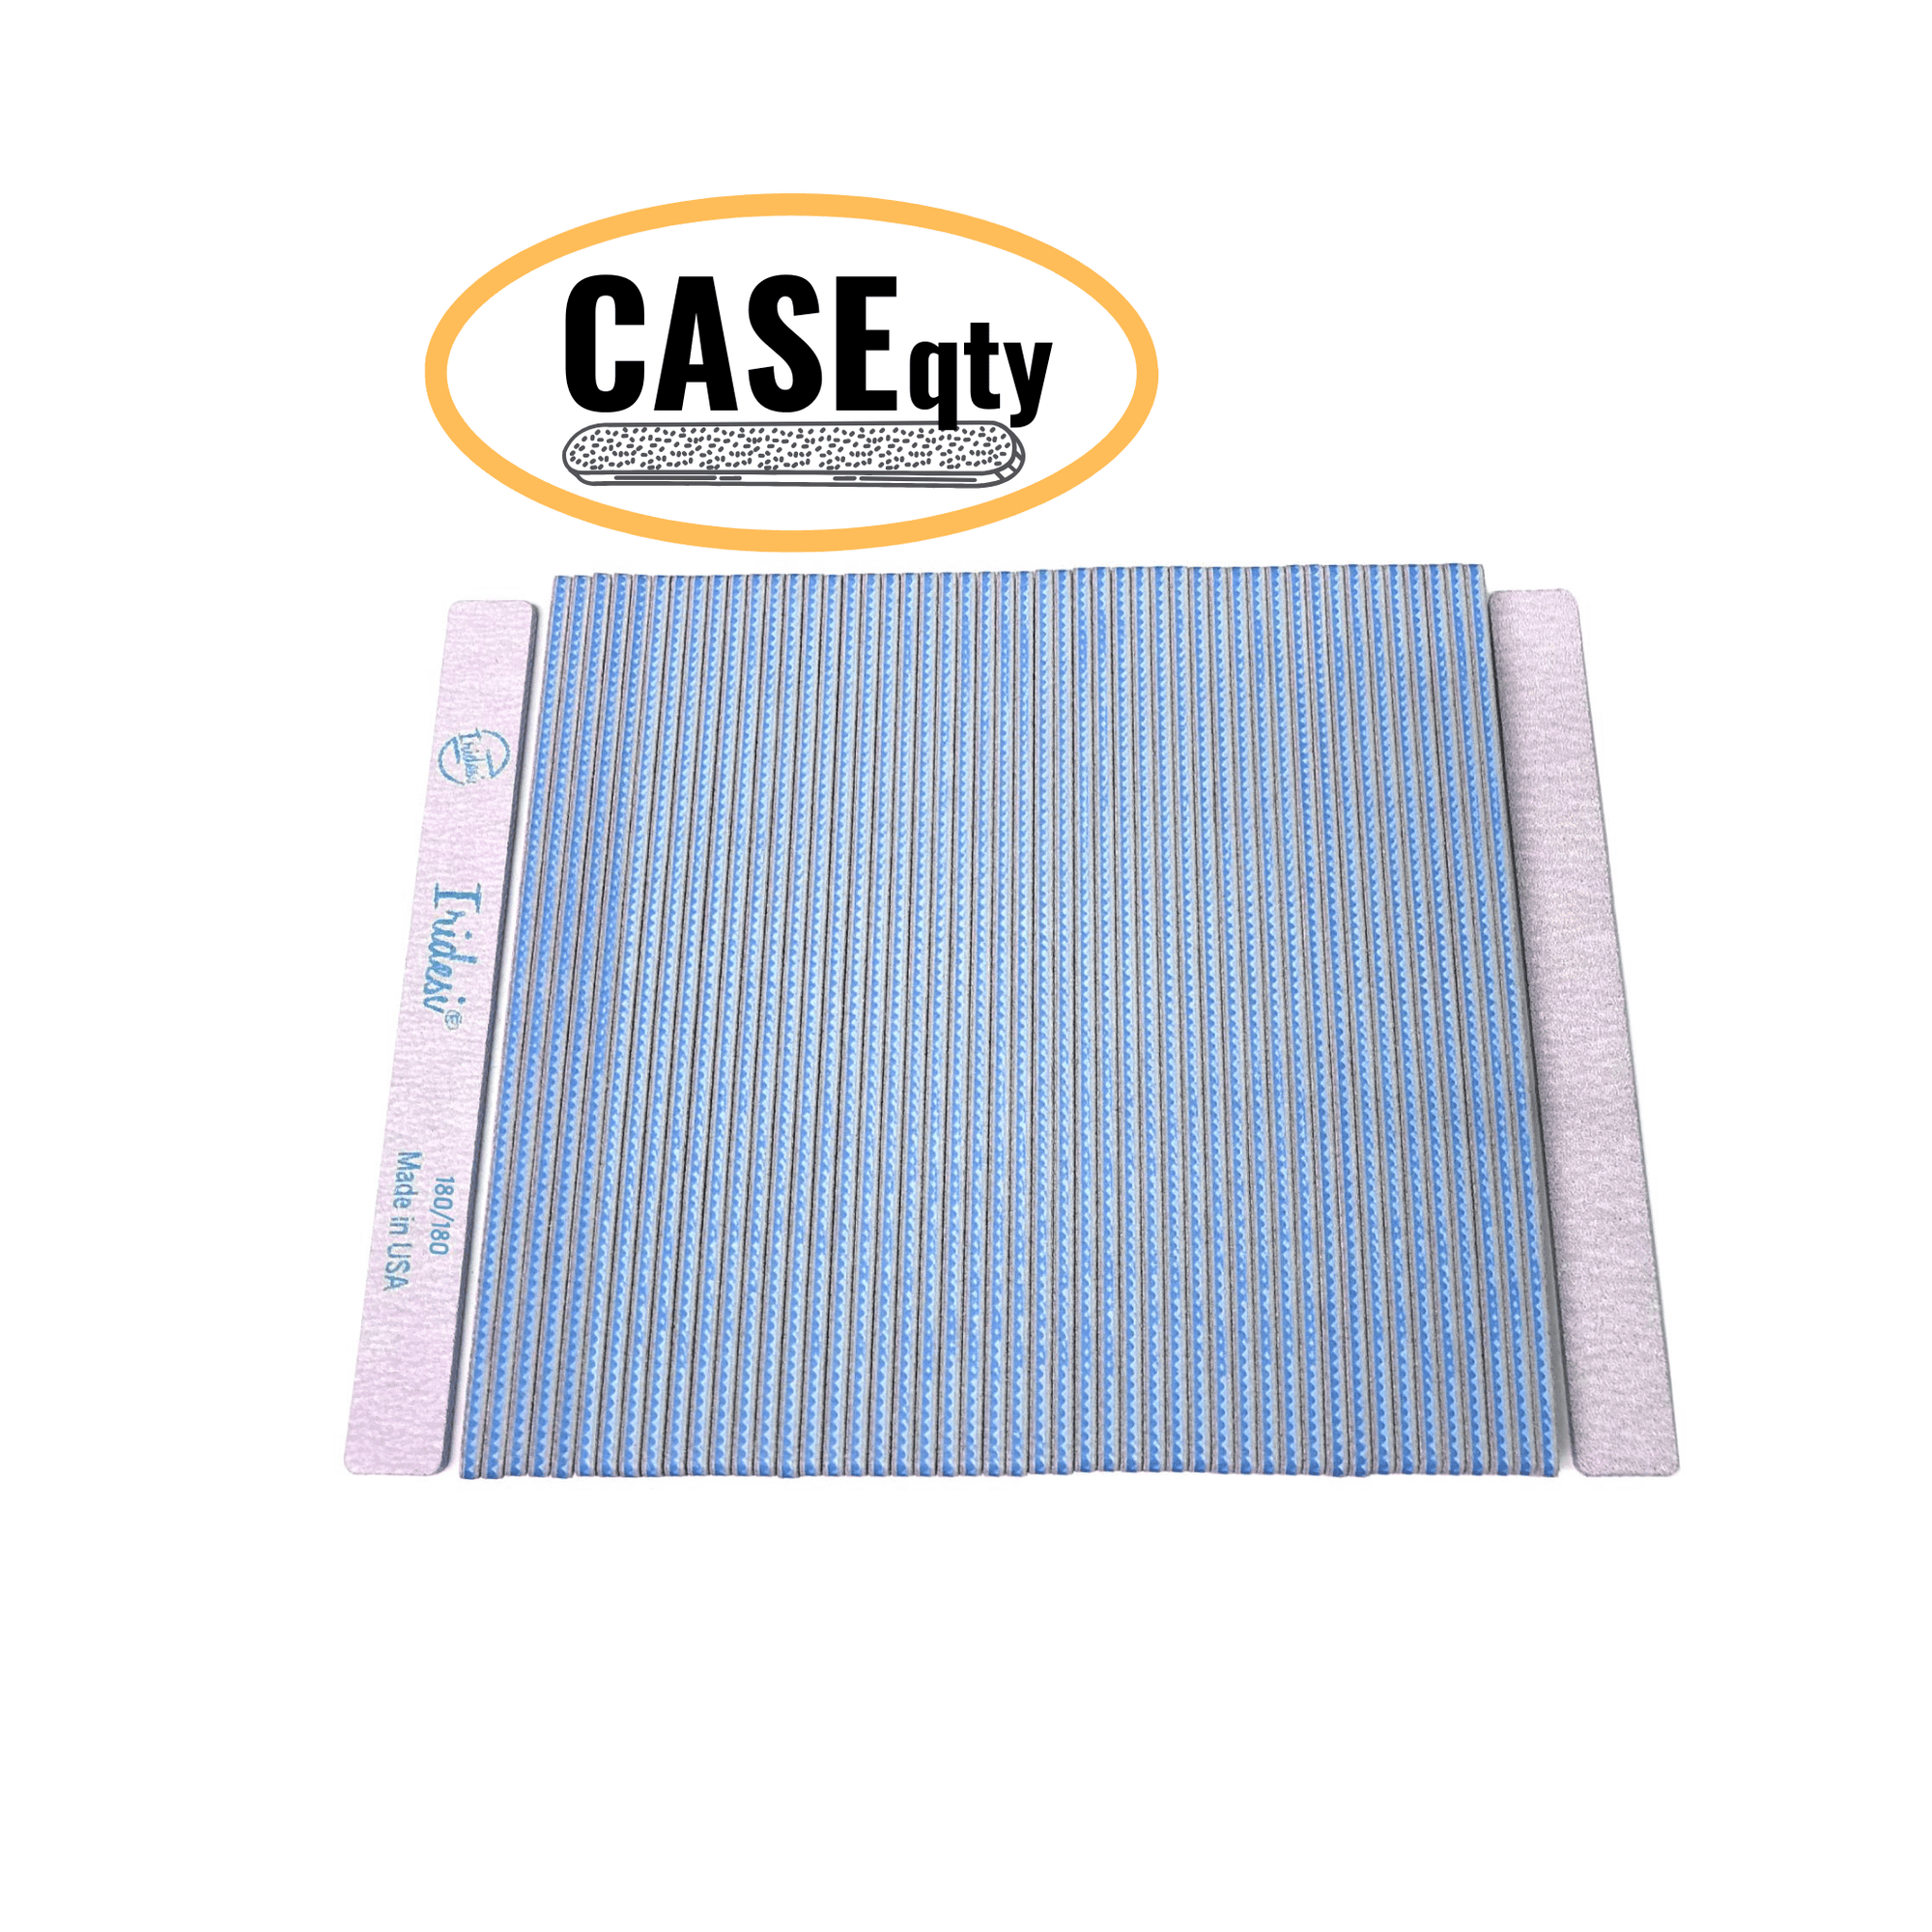 Zebra Color Coded Emery Boards, Nail Filer Serrated Edge, Square End Fingernail Files, Case of 40 Packs of 50 Pieces